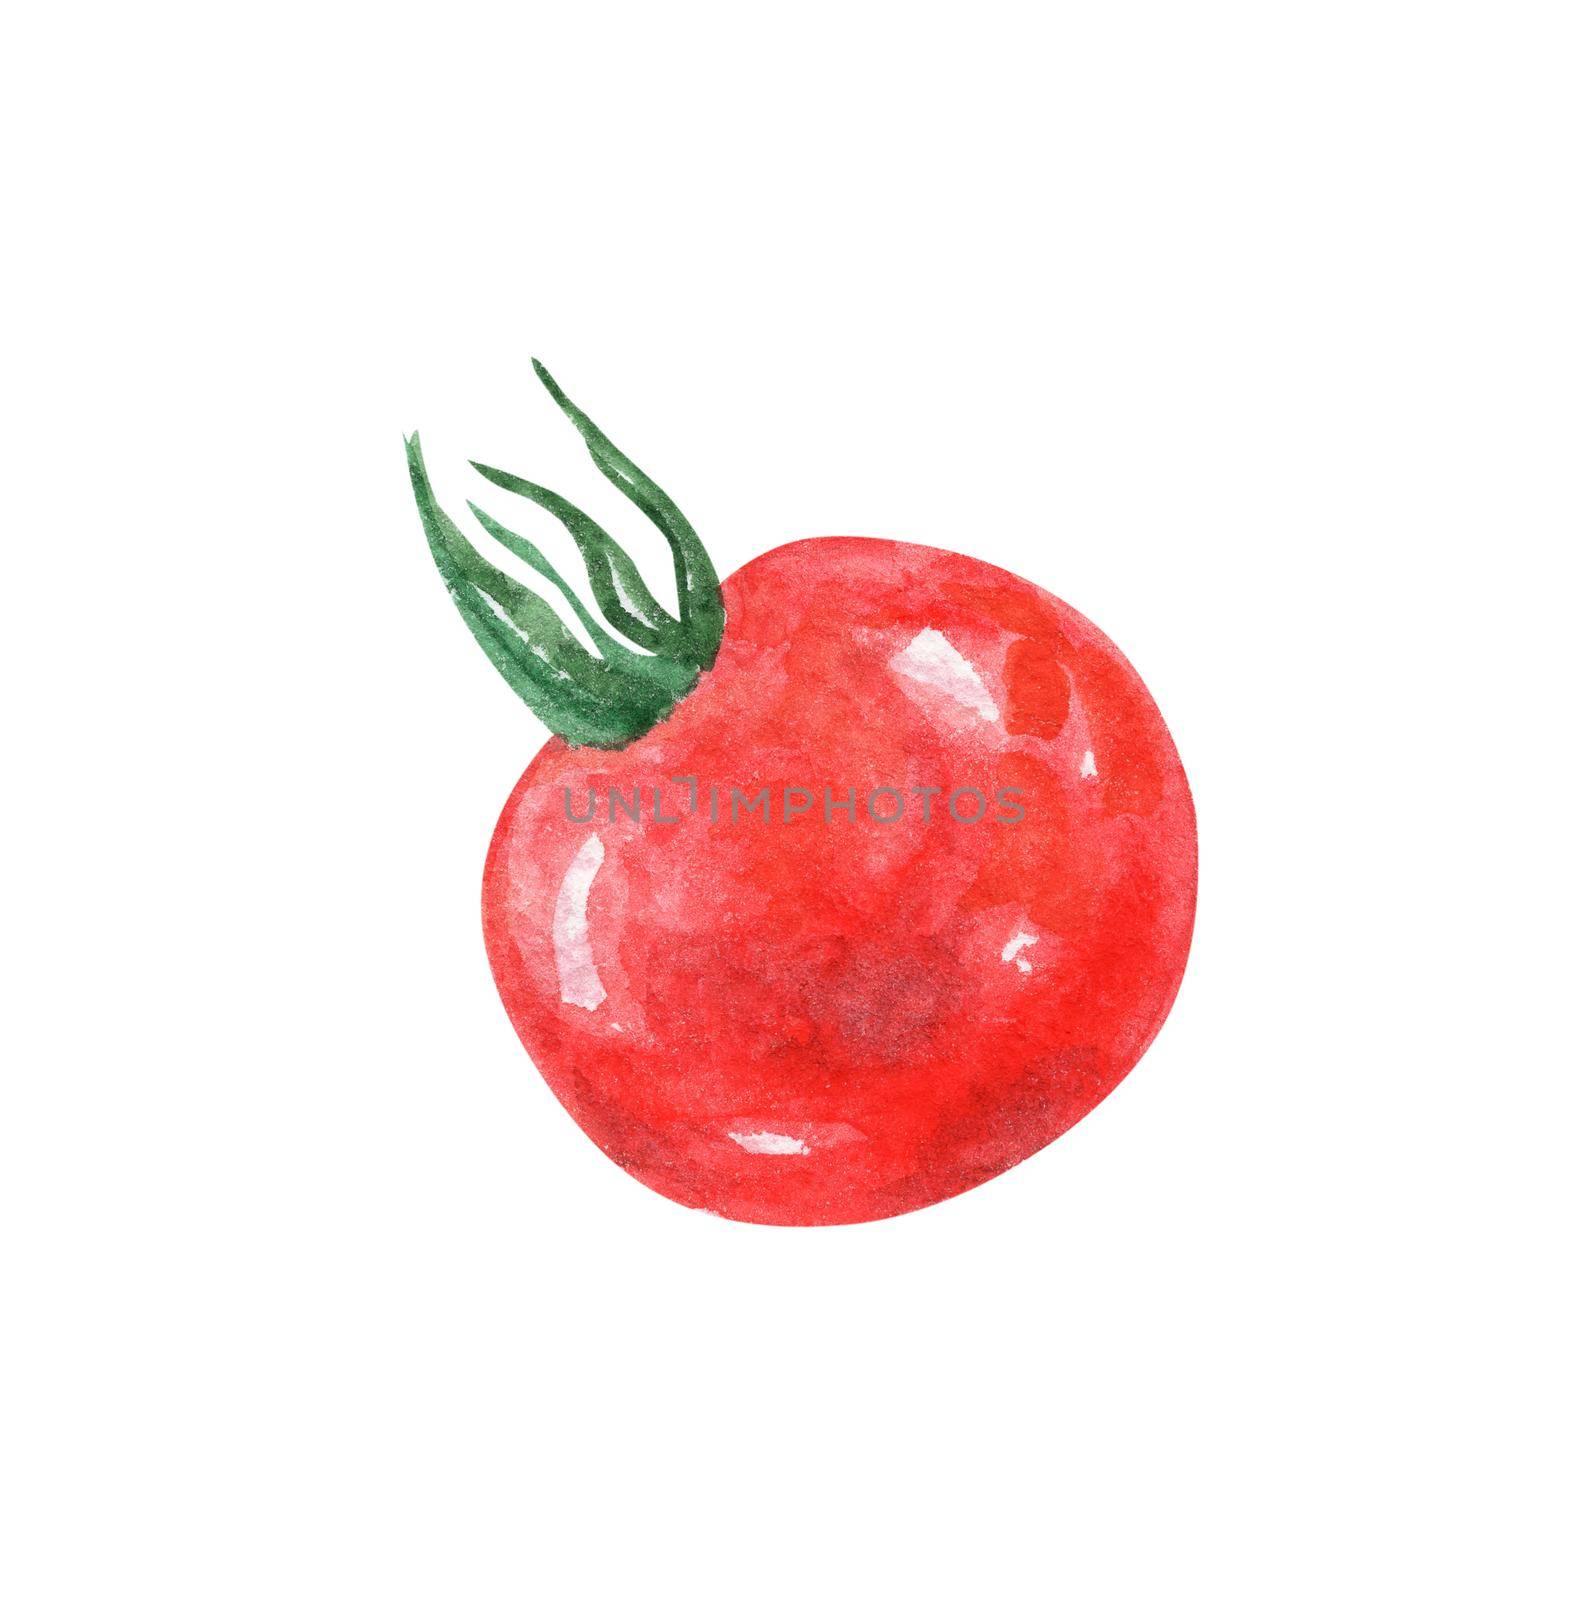 watercolor tomato cherry isolated on white background by dreamloud